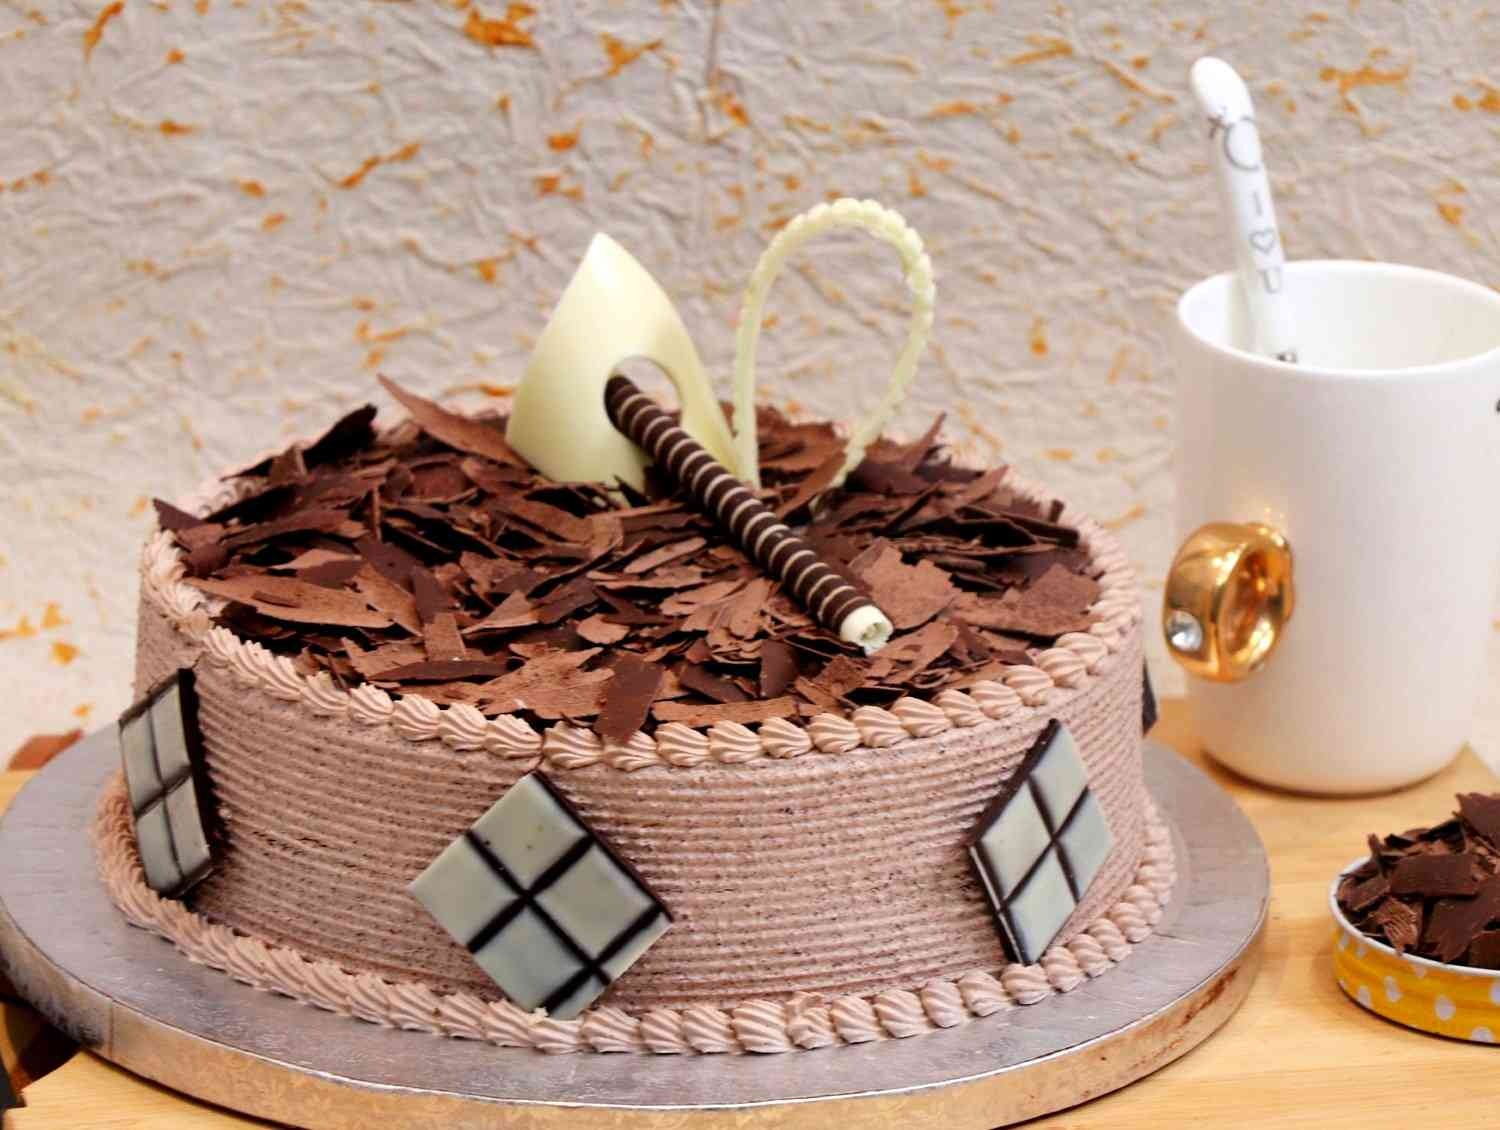 Cake delivery services: Why are they so popular?